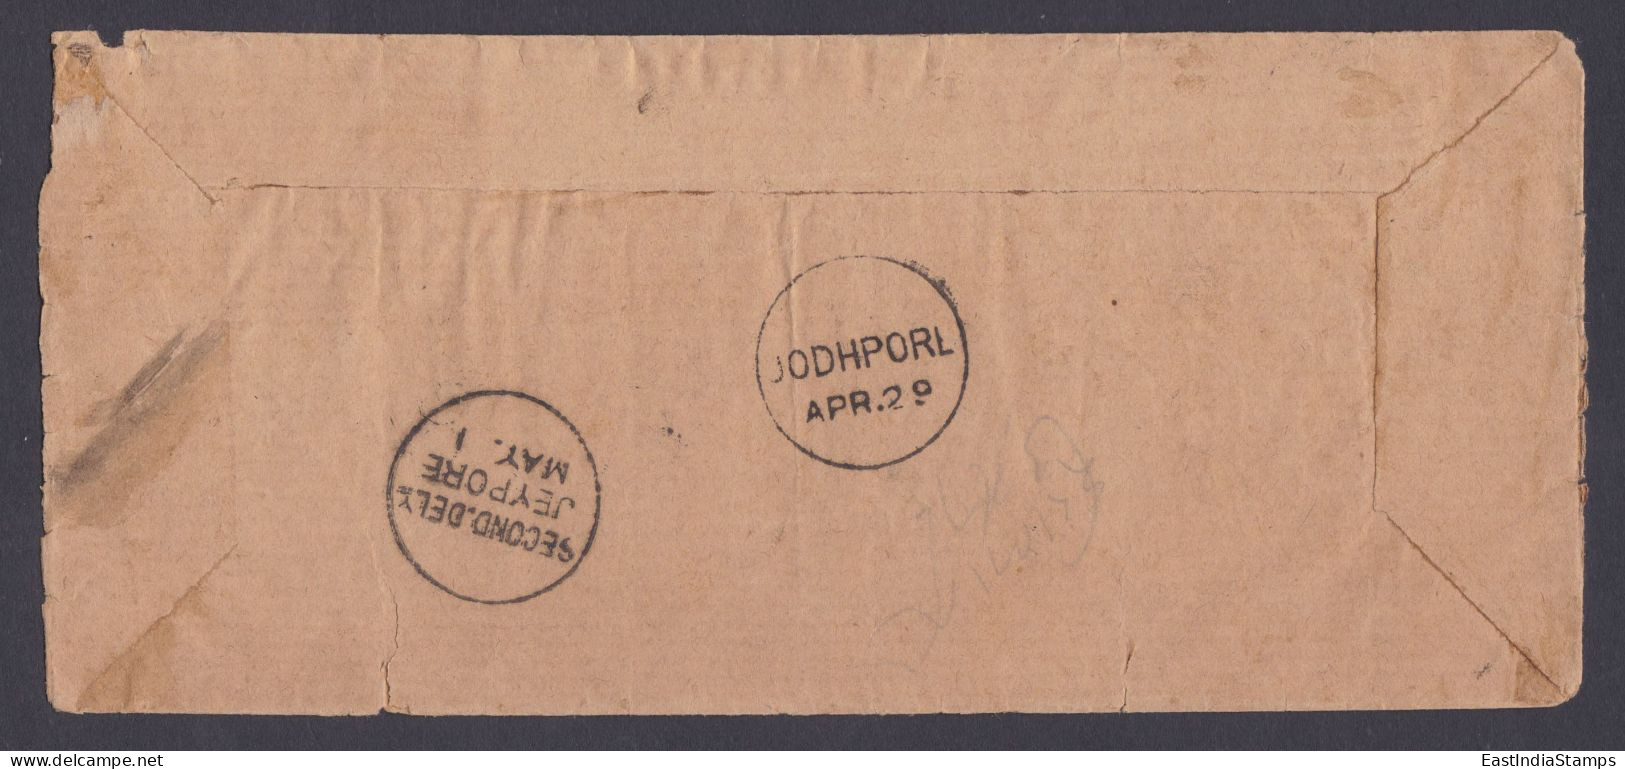 Inde British East India Company Queen Victoria Used 1884 Cover 2X Half Anna Stamp, Jeypore, Jaipur, Jodhpur Re-directed - 1858-79 Crown Colony